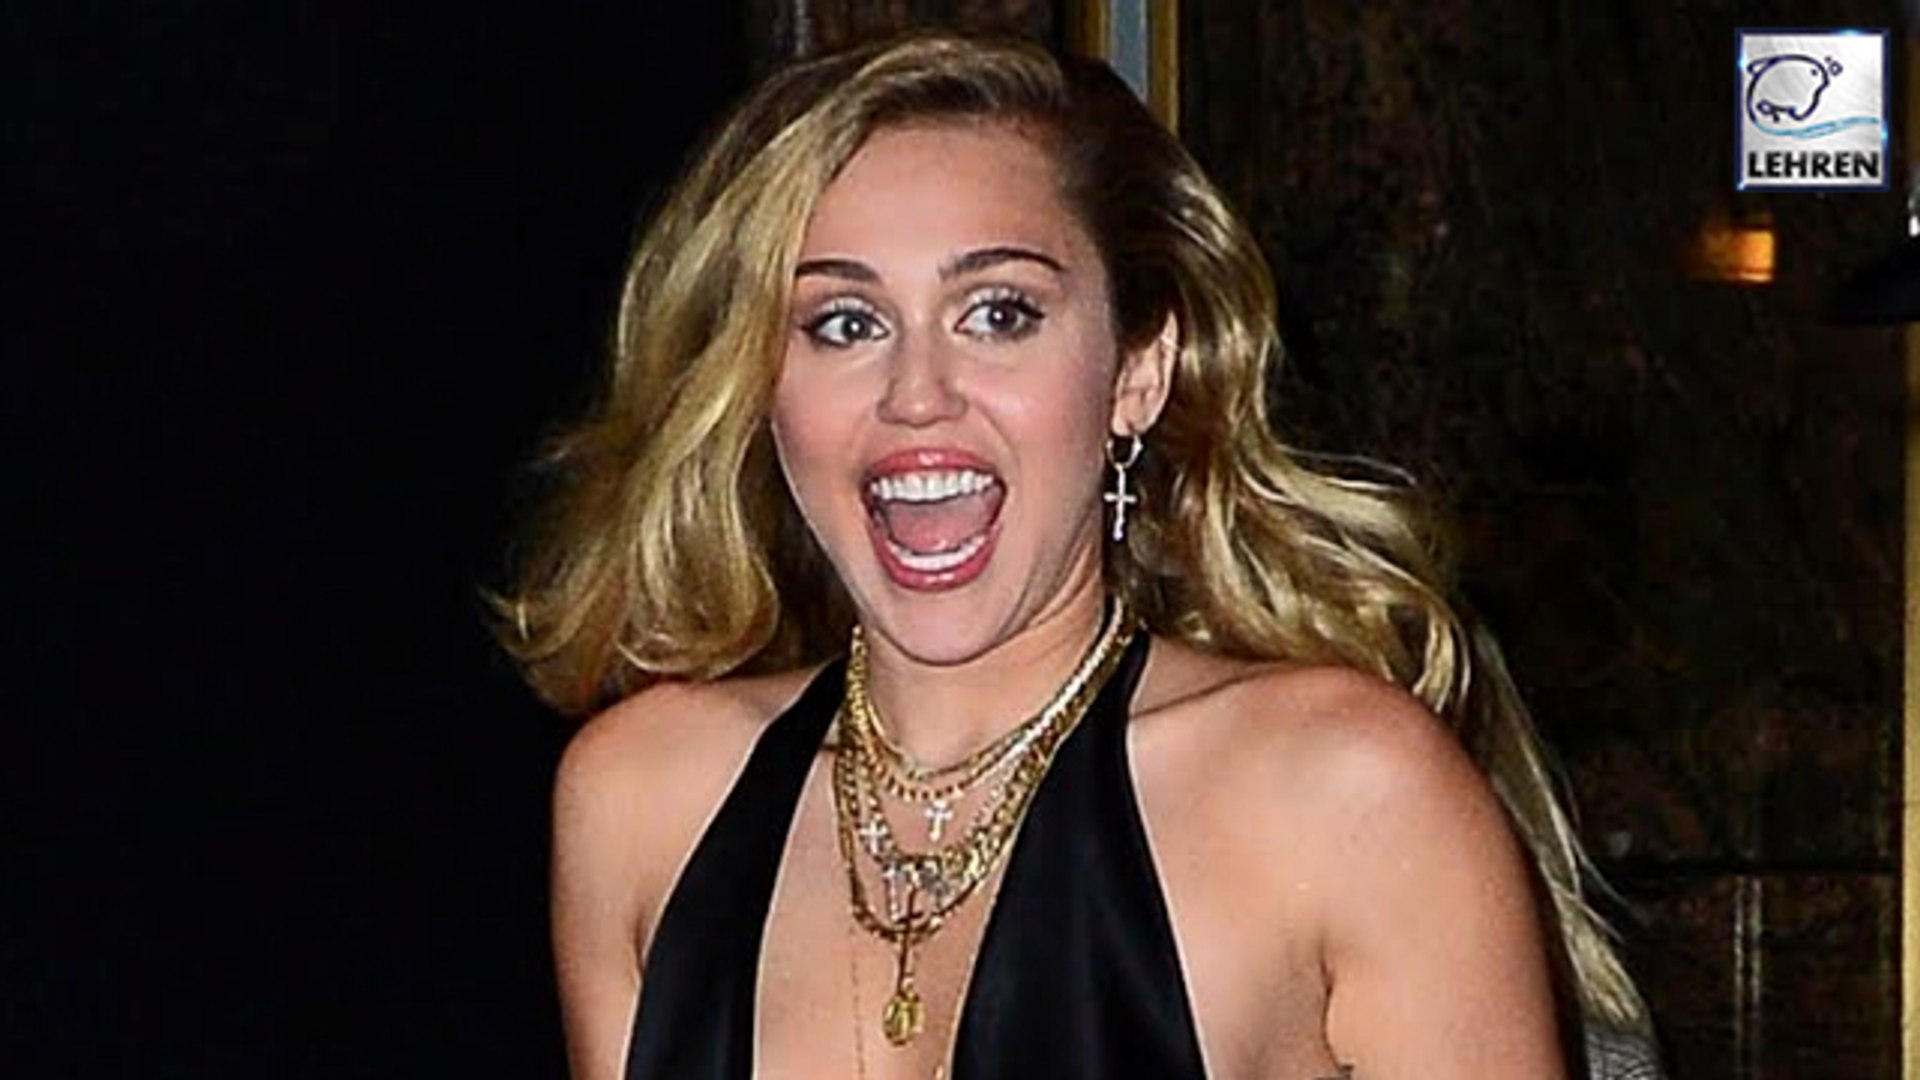 A Fan Forcefully Grabbed Miley Cyrus & Tried To Kiss Her